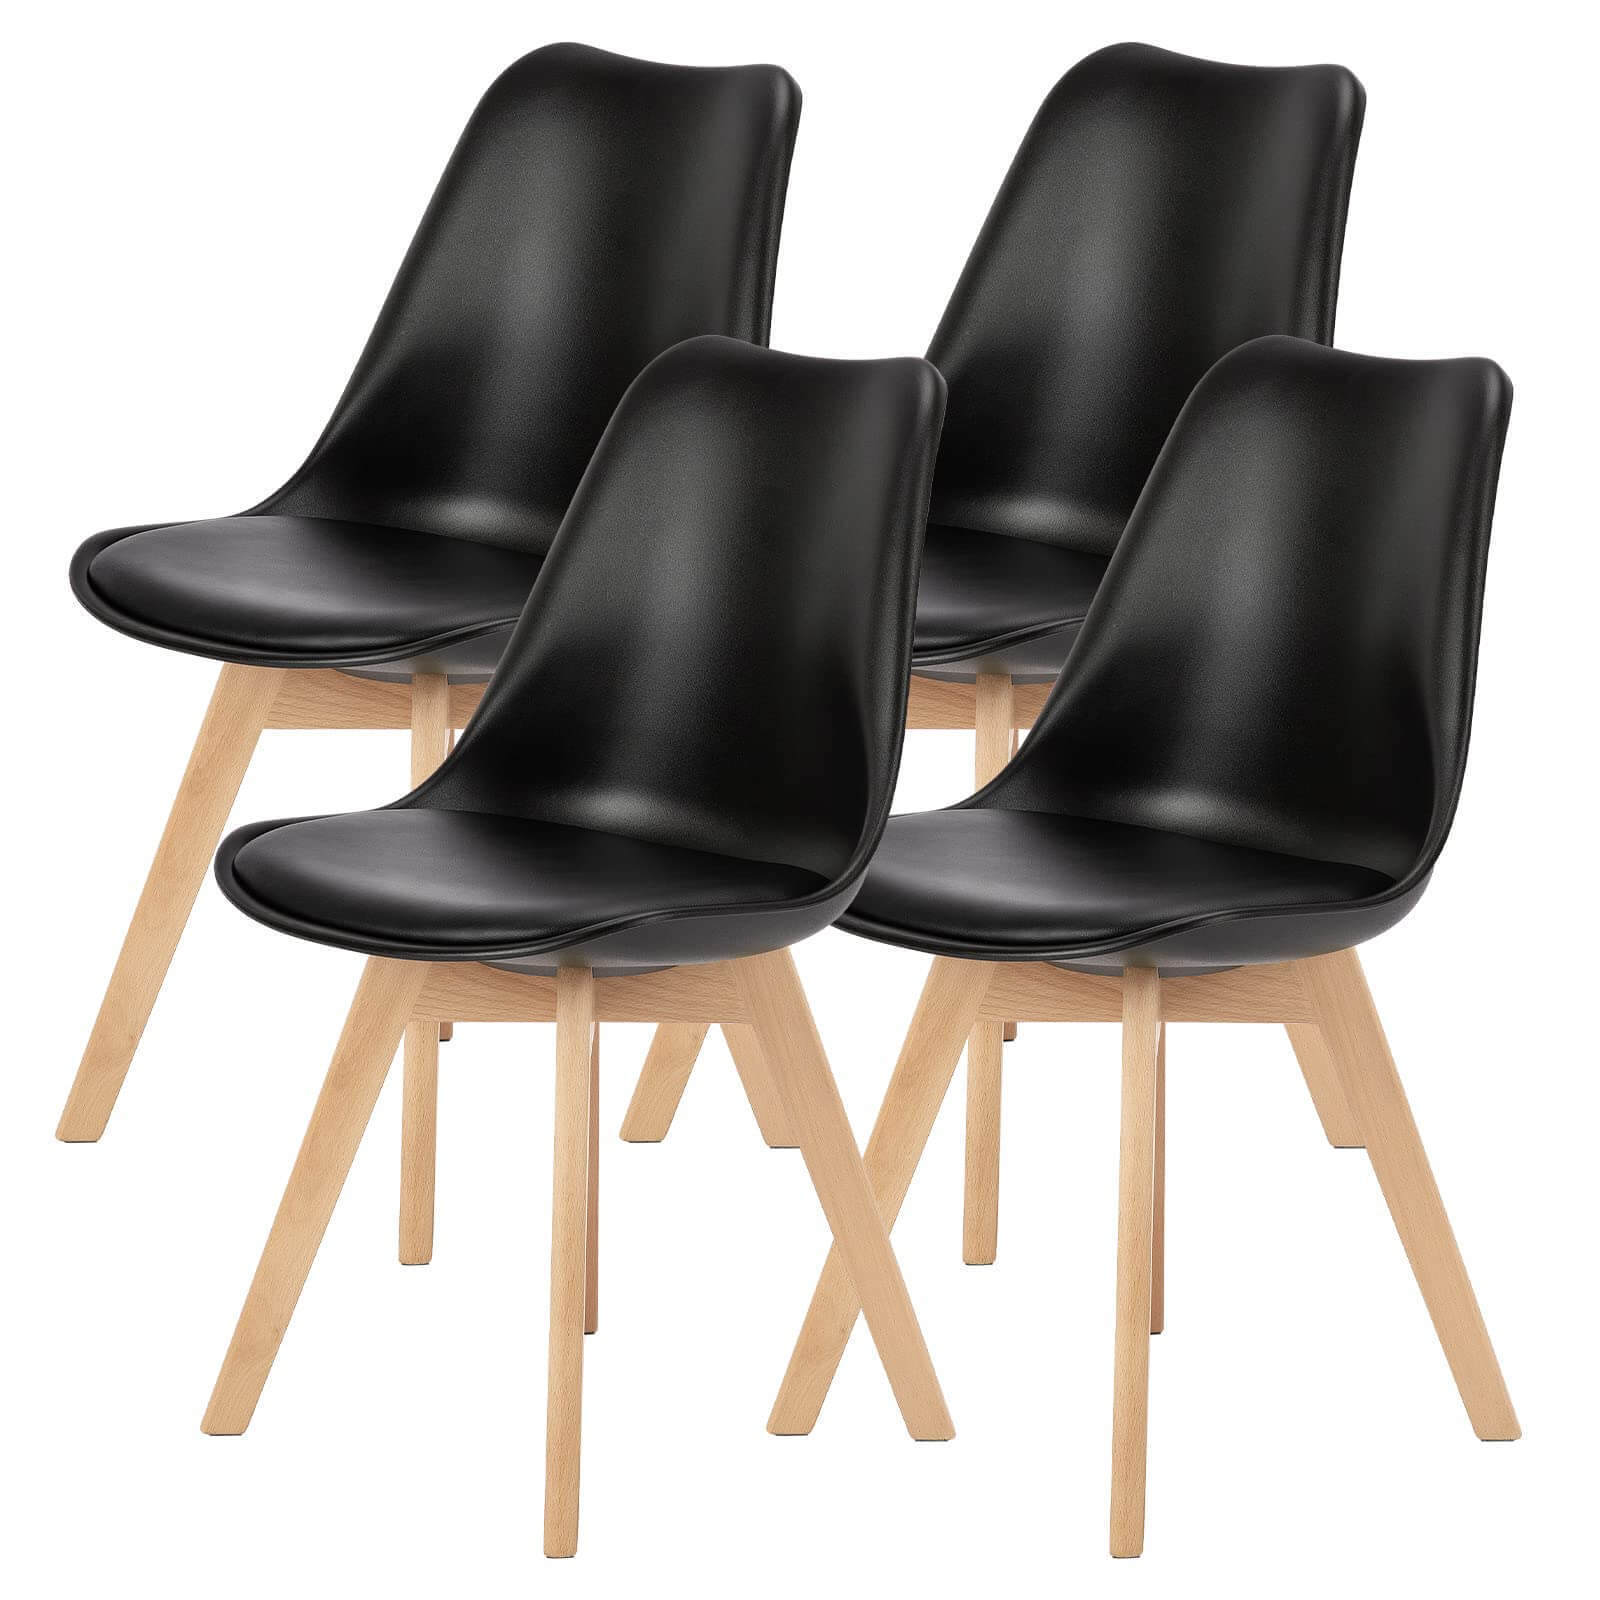 PU Leather Upholstered Dining Chairs with Wood Legs, Set of 4 (Black)